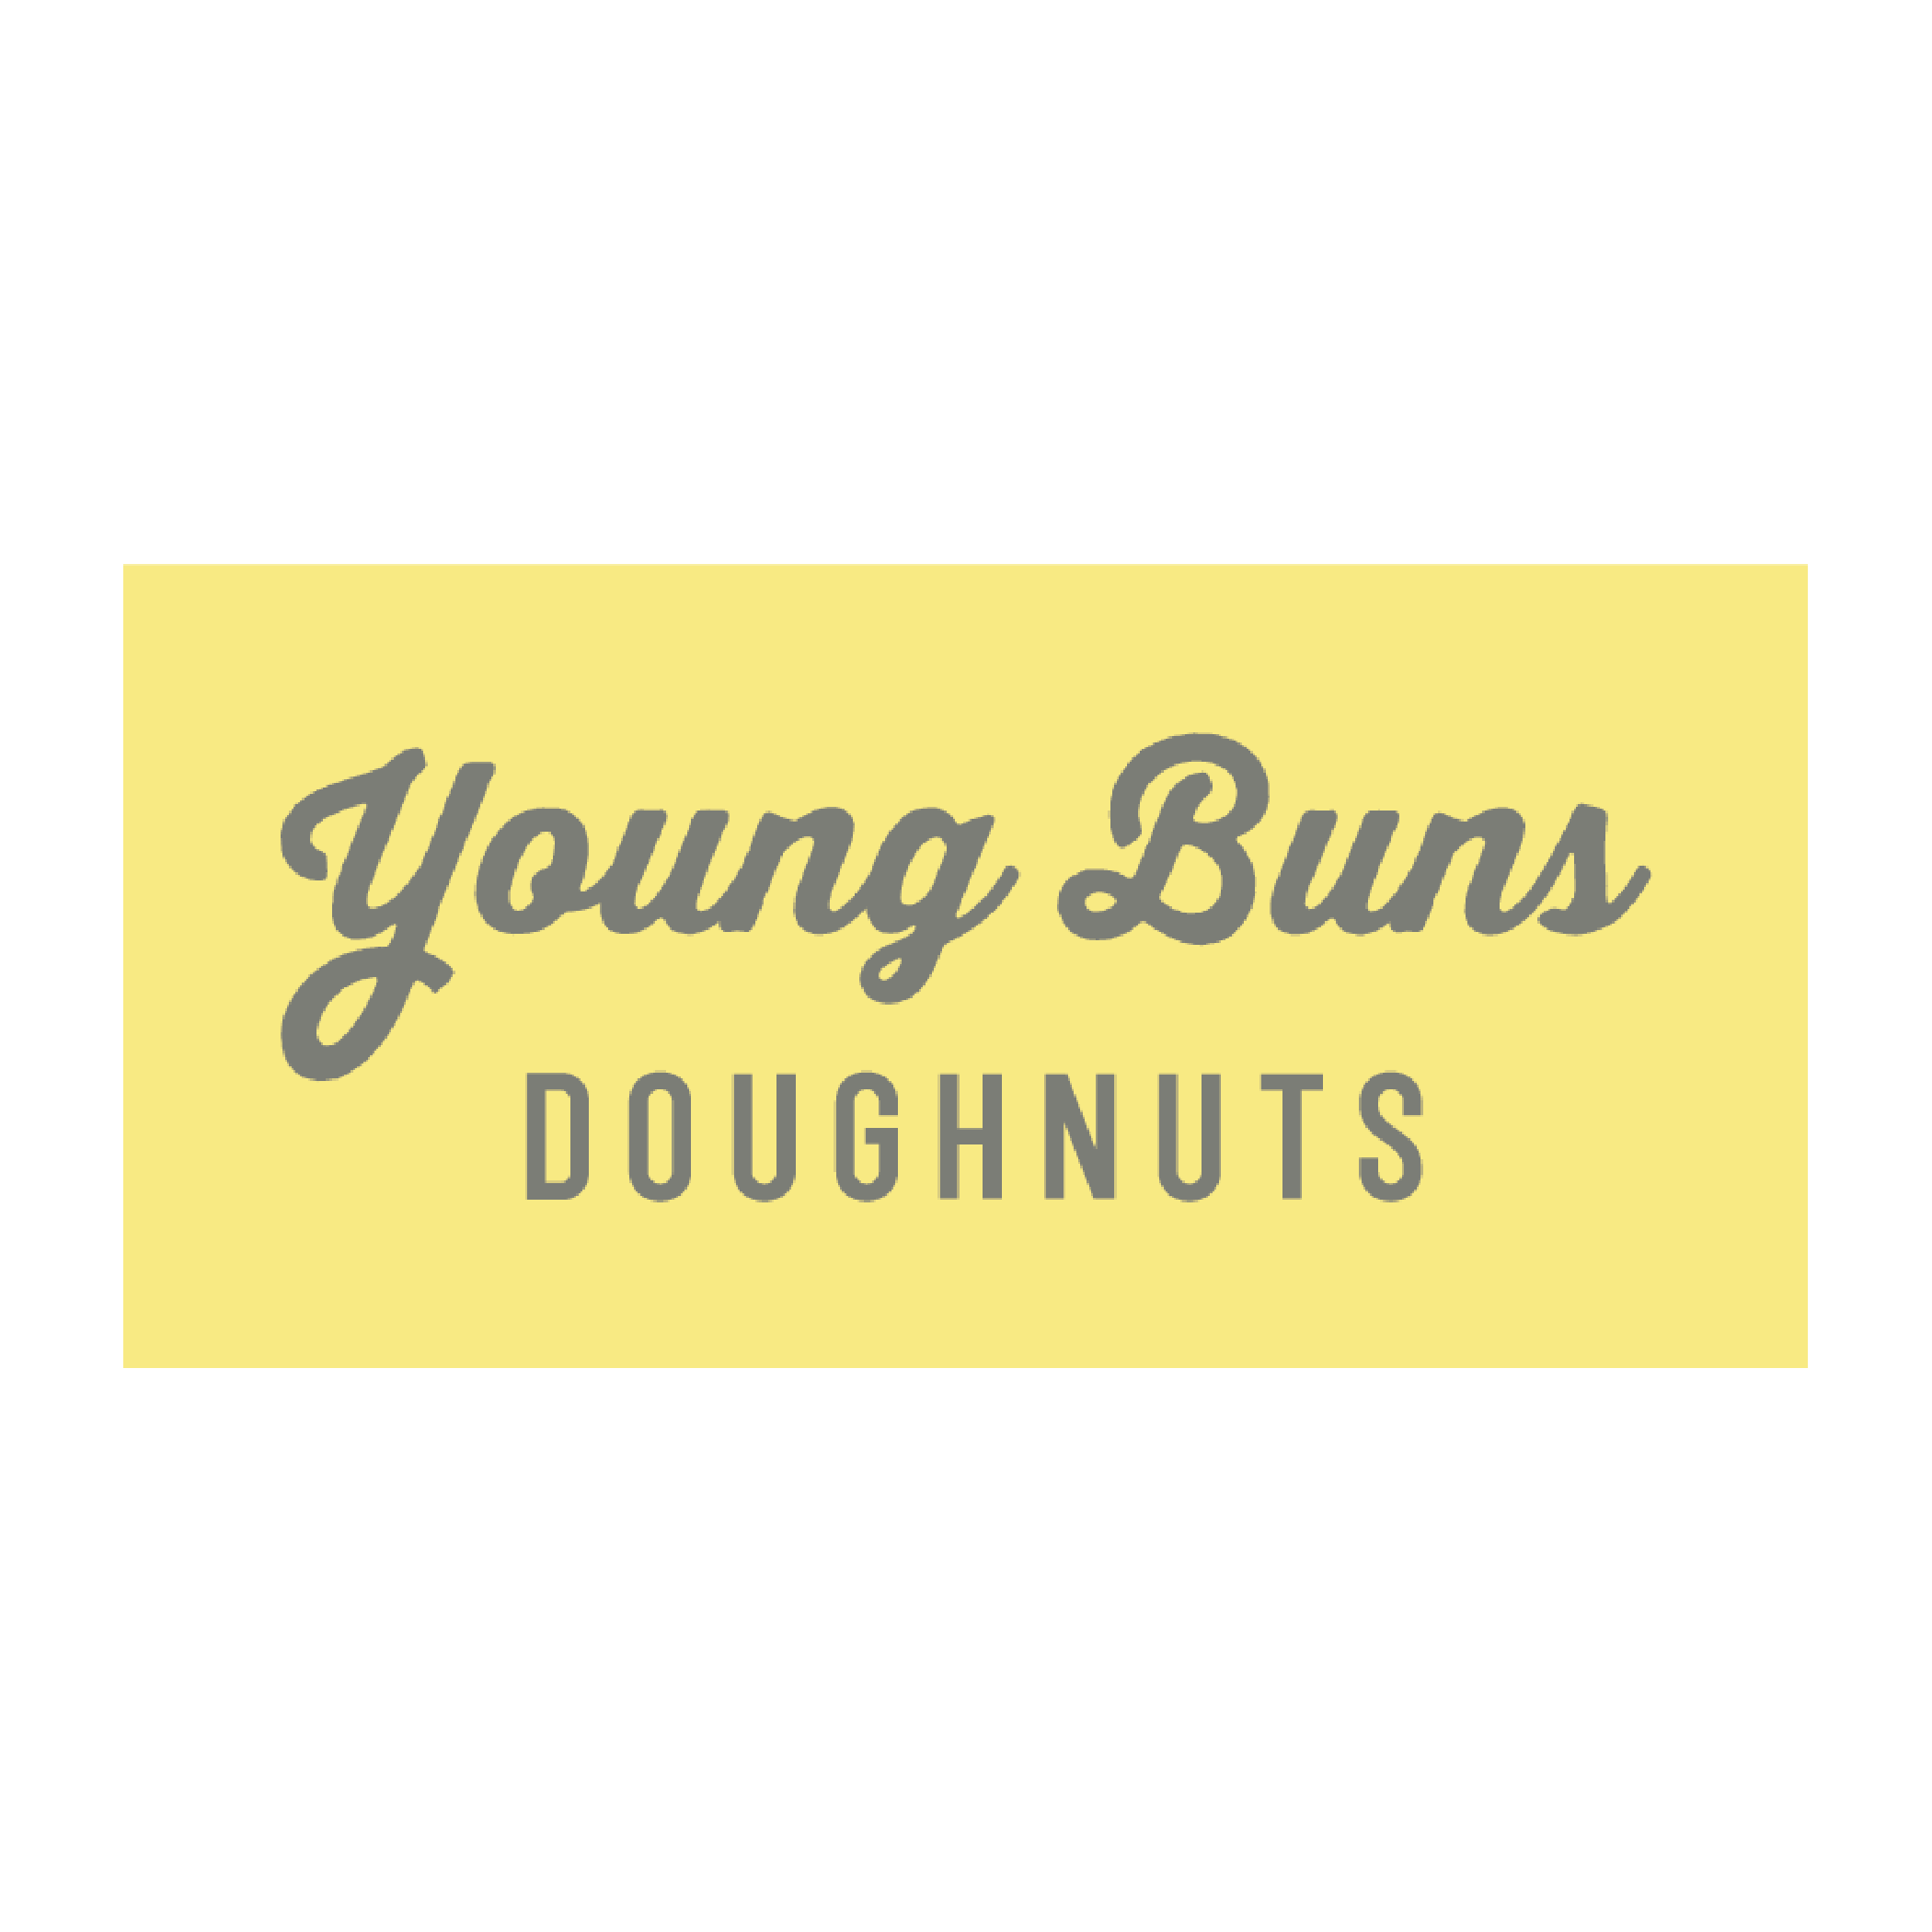 YOUNG BUNS.png